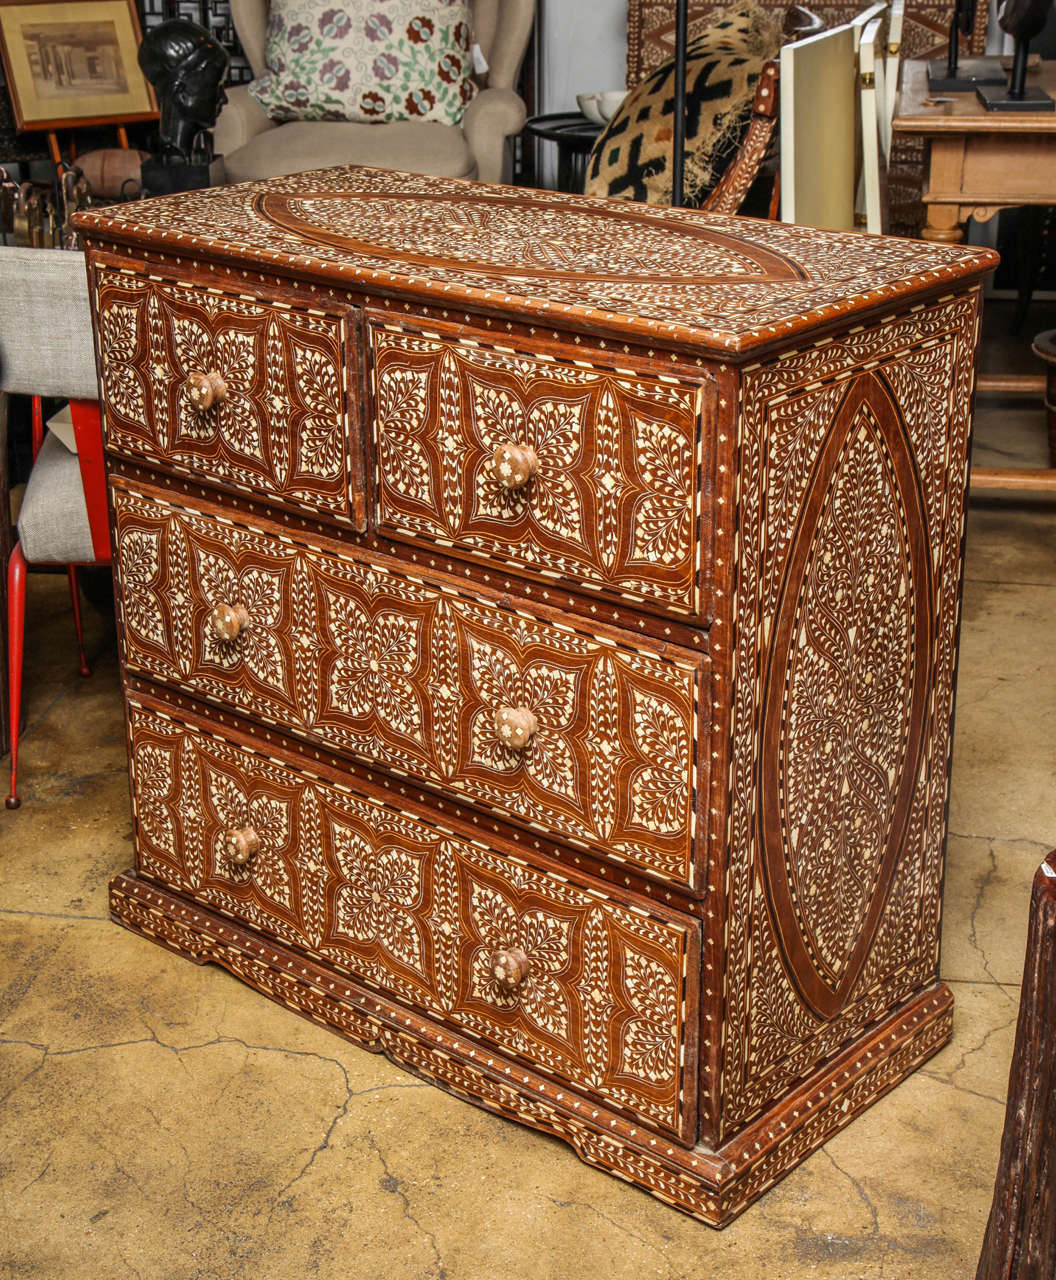 A bone inlaid chest of drawers from India. Four drawers. Inlays in a Classic Indian pattern.